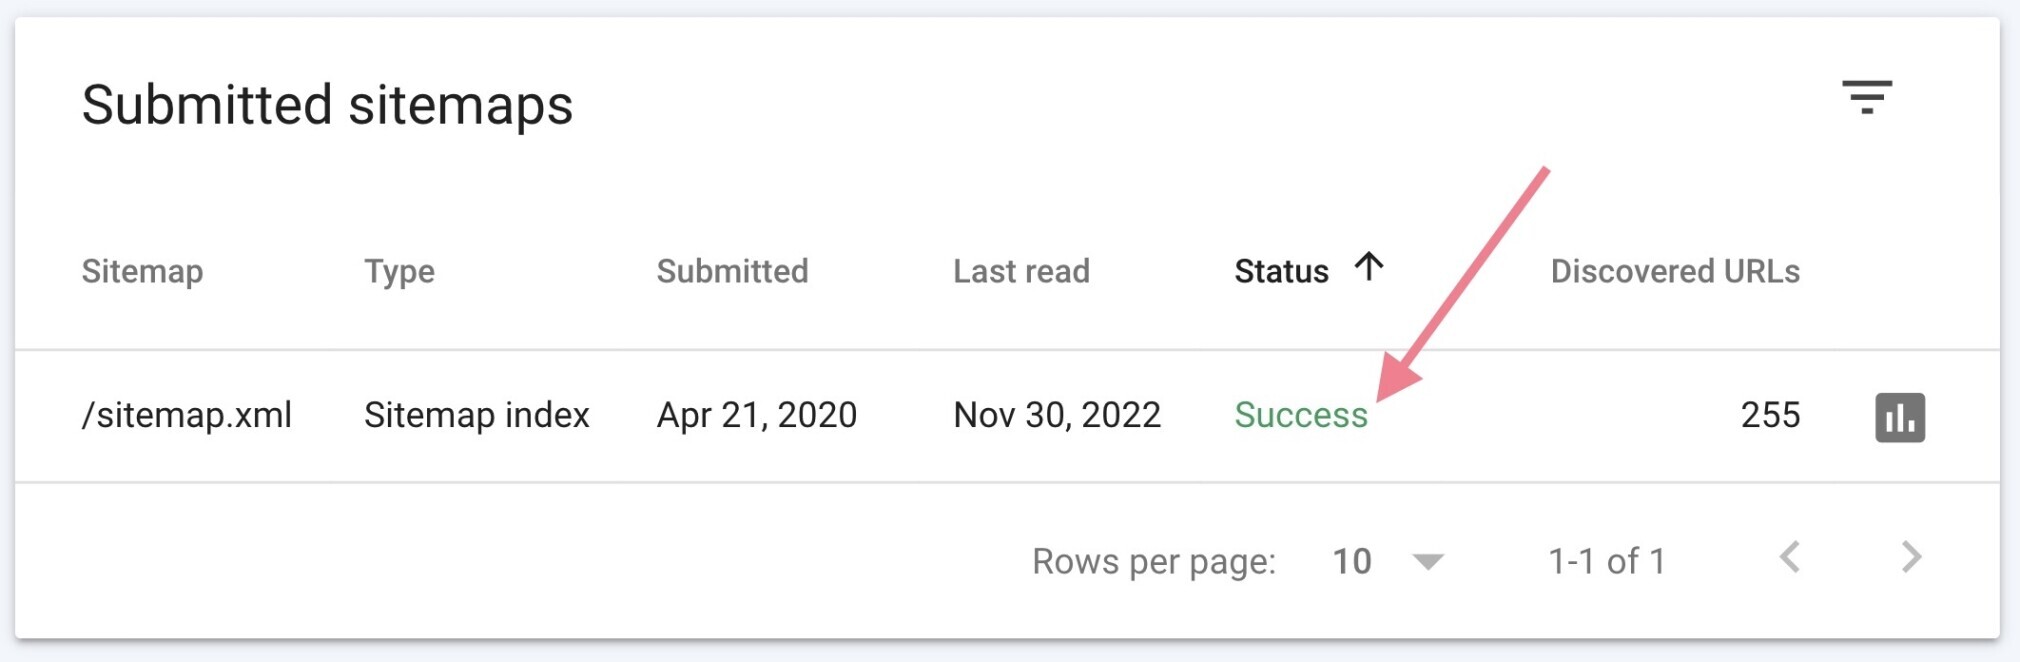 submitted sitemaps in google search console